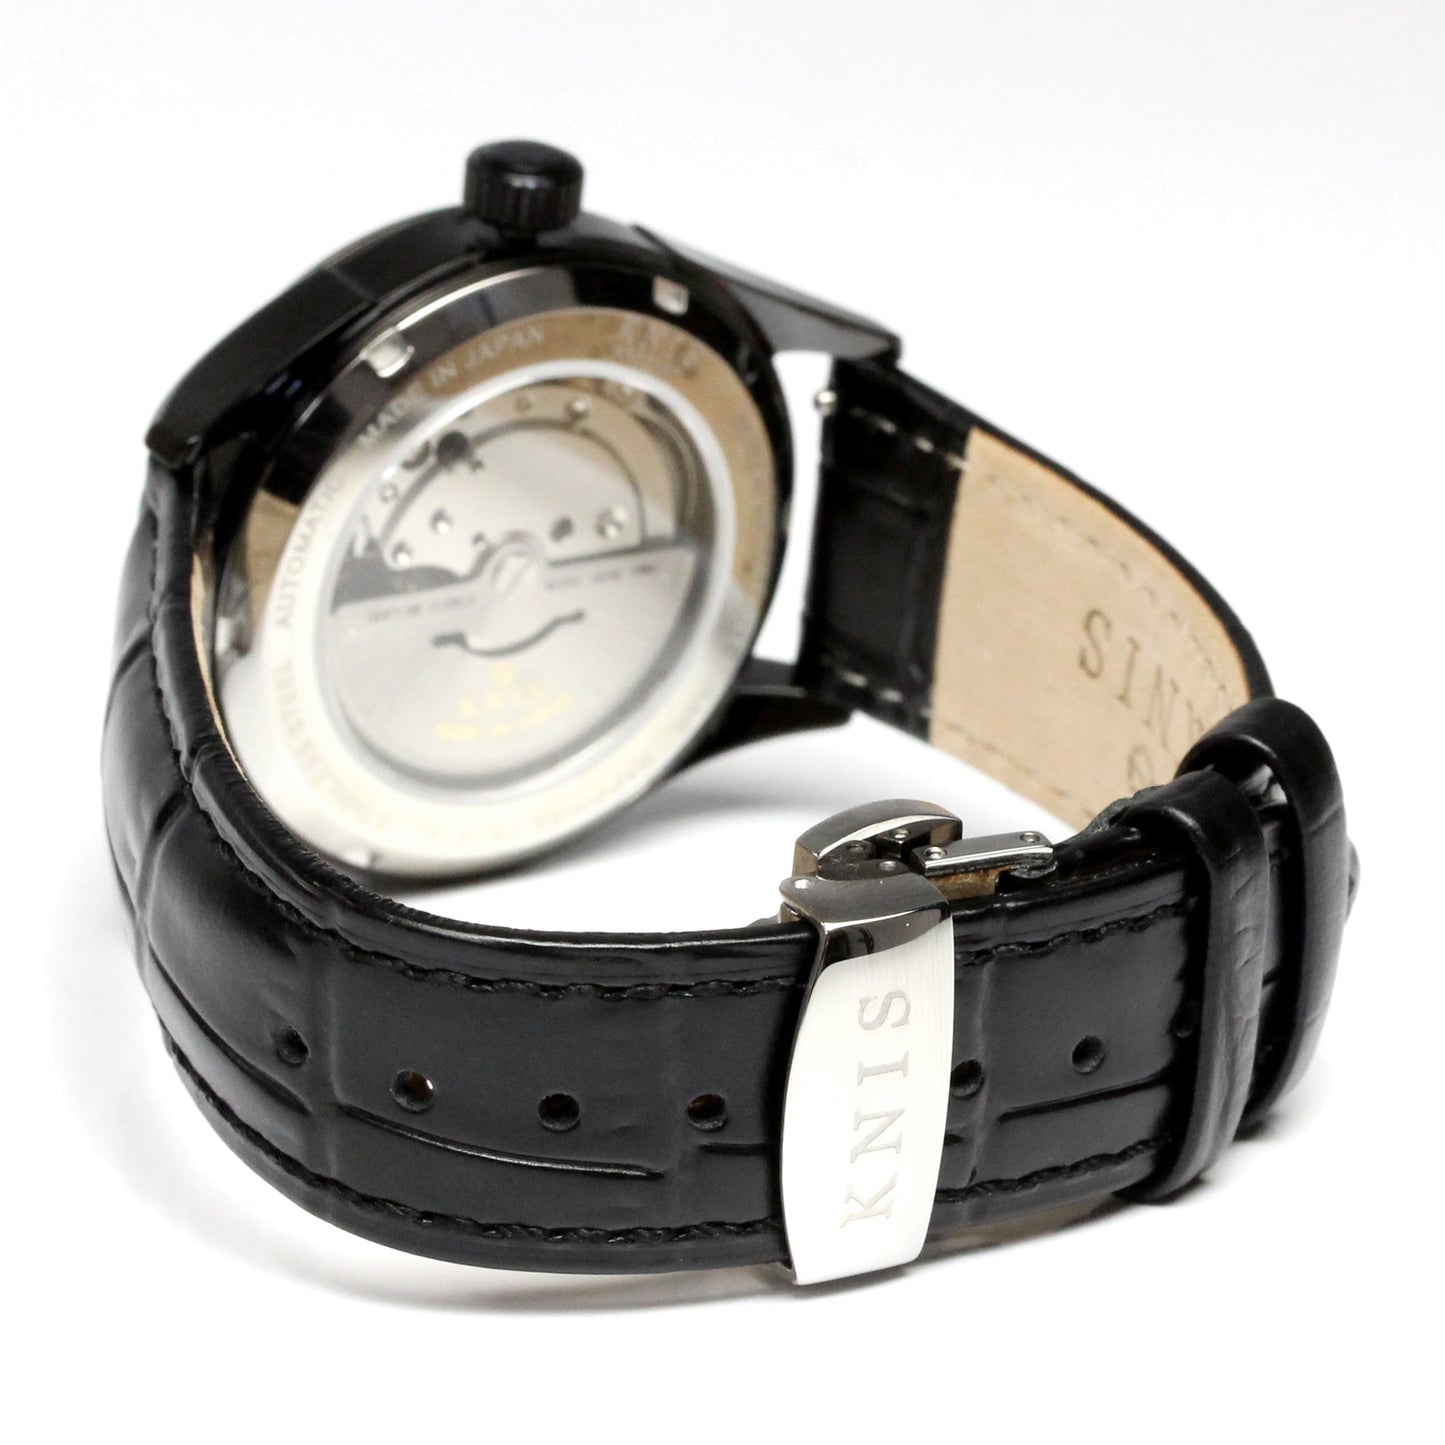 KNIS Meteorite Made in Japan Automatic Watch Men's Leather Strap Leather Black KN001-MTBKLE 